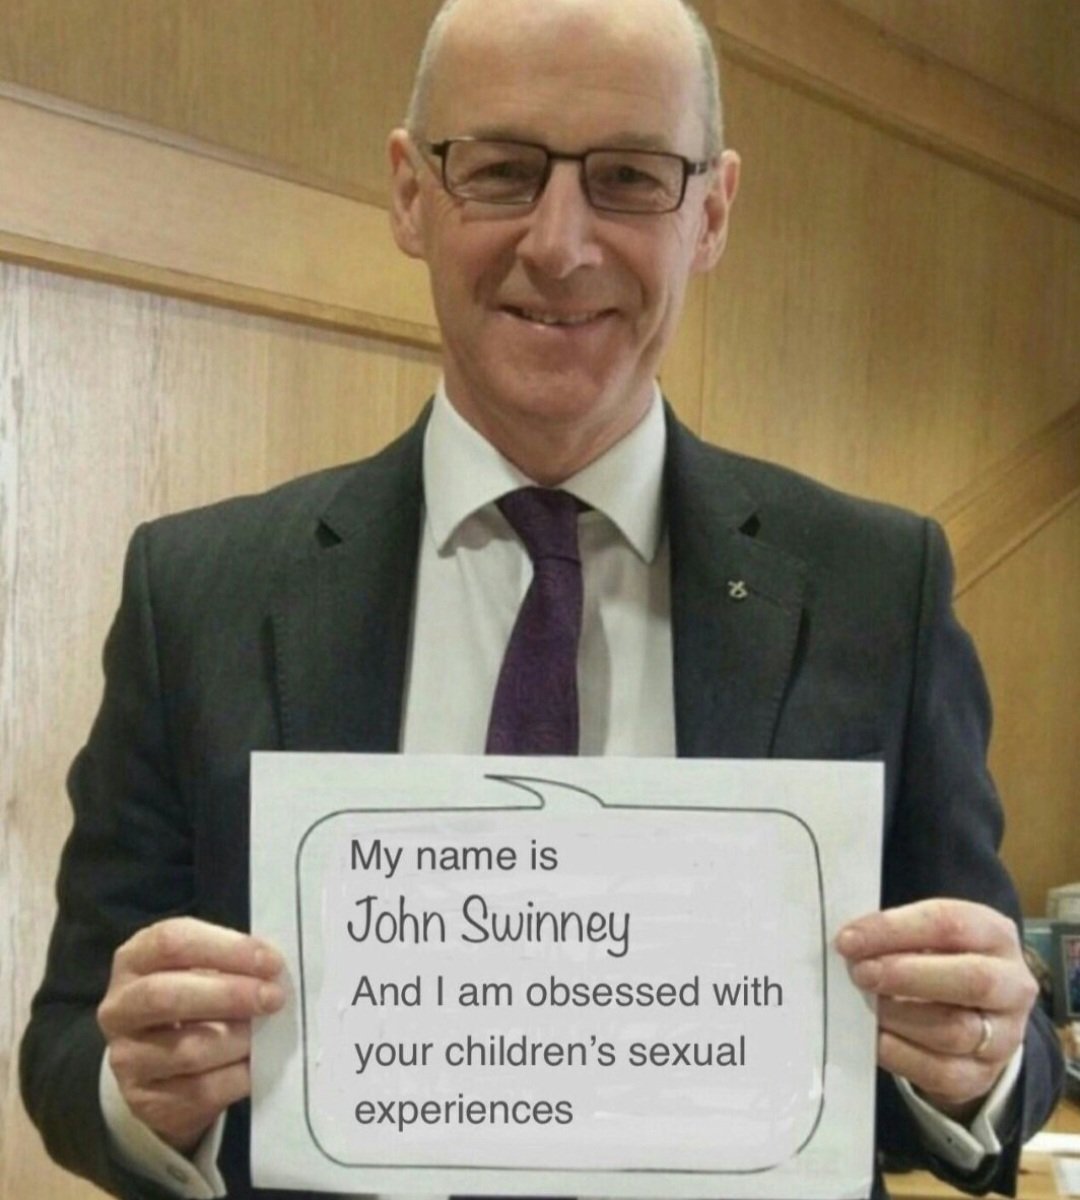 Today is May 15th, 2024 and @JohnSwinney  is still the most Braindead Sock puppet politician in modern Scottish History.@vation_o @Effiedeans @Arnssunshine @SilvioTattiscon  @putey_pute #snpout @vation_o @HumzaYousaf @Alliance4Unity @enough_is_enuf @GitGrumpygit @Iainmackay8